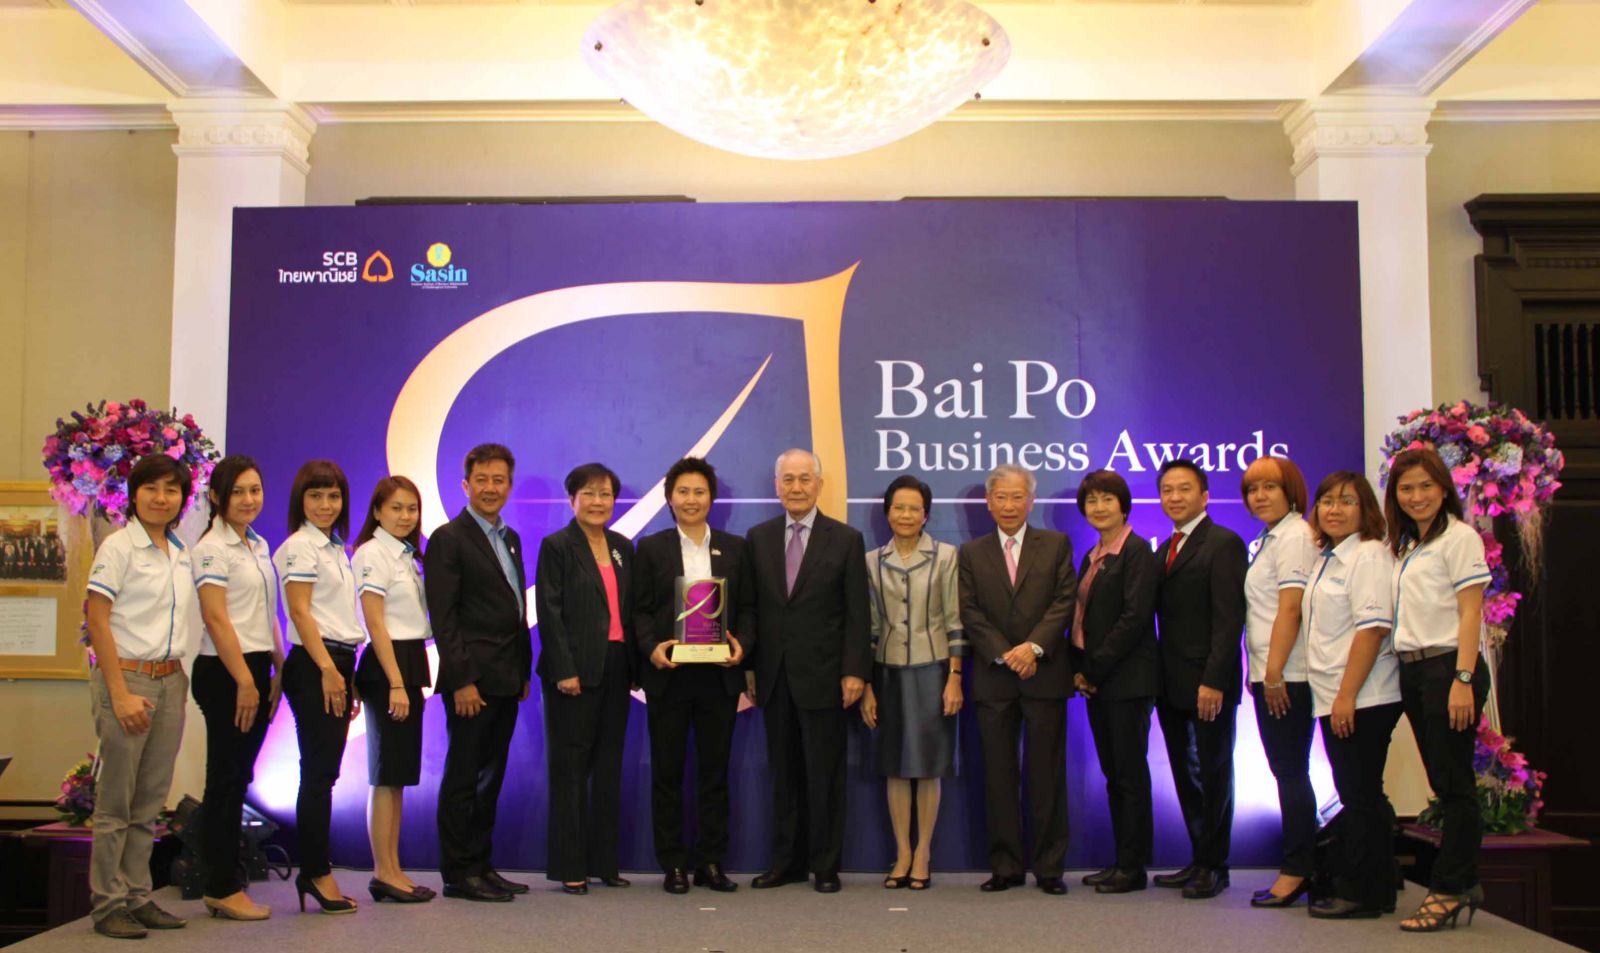 Techno-sell wins the 8th Bai Po Business Awards by Sasin.